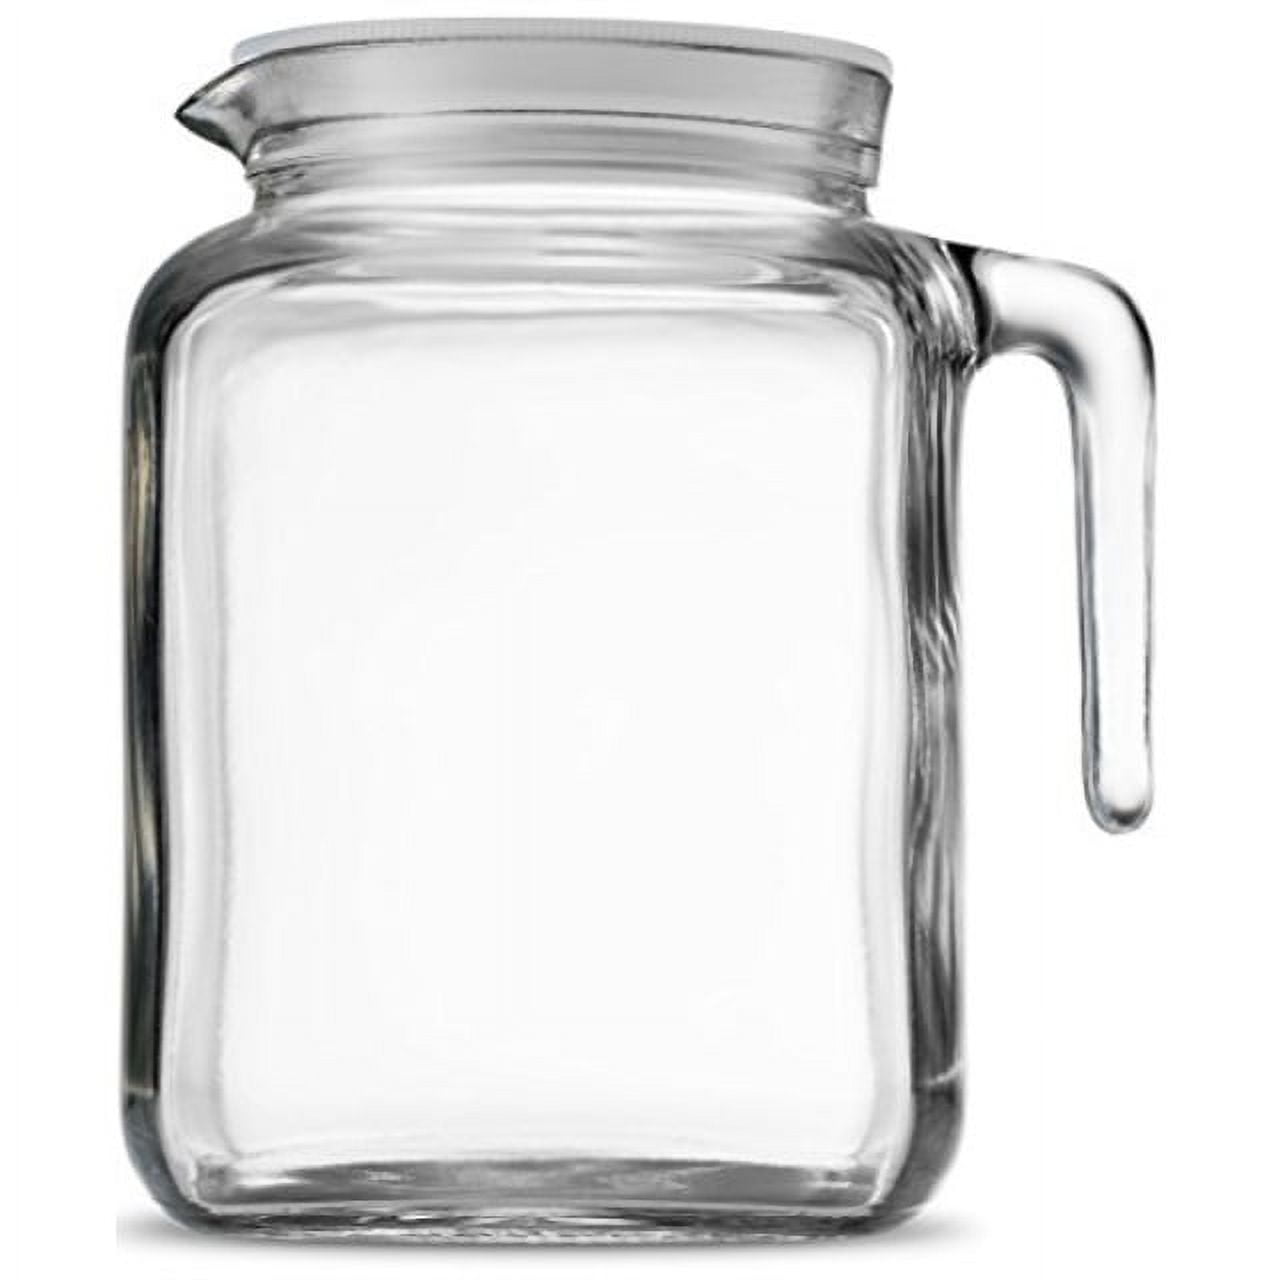 Bormioli Rocco Hermetic Seal Glass Pitcher With Lid and Spout [68 Ounce]  Great for Homemade Juice & Cold Tea or for Glass Milk Bottles